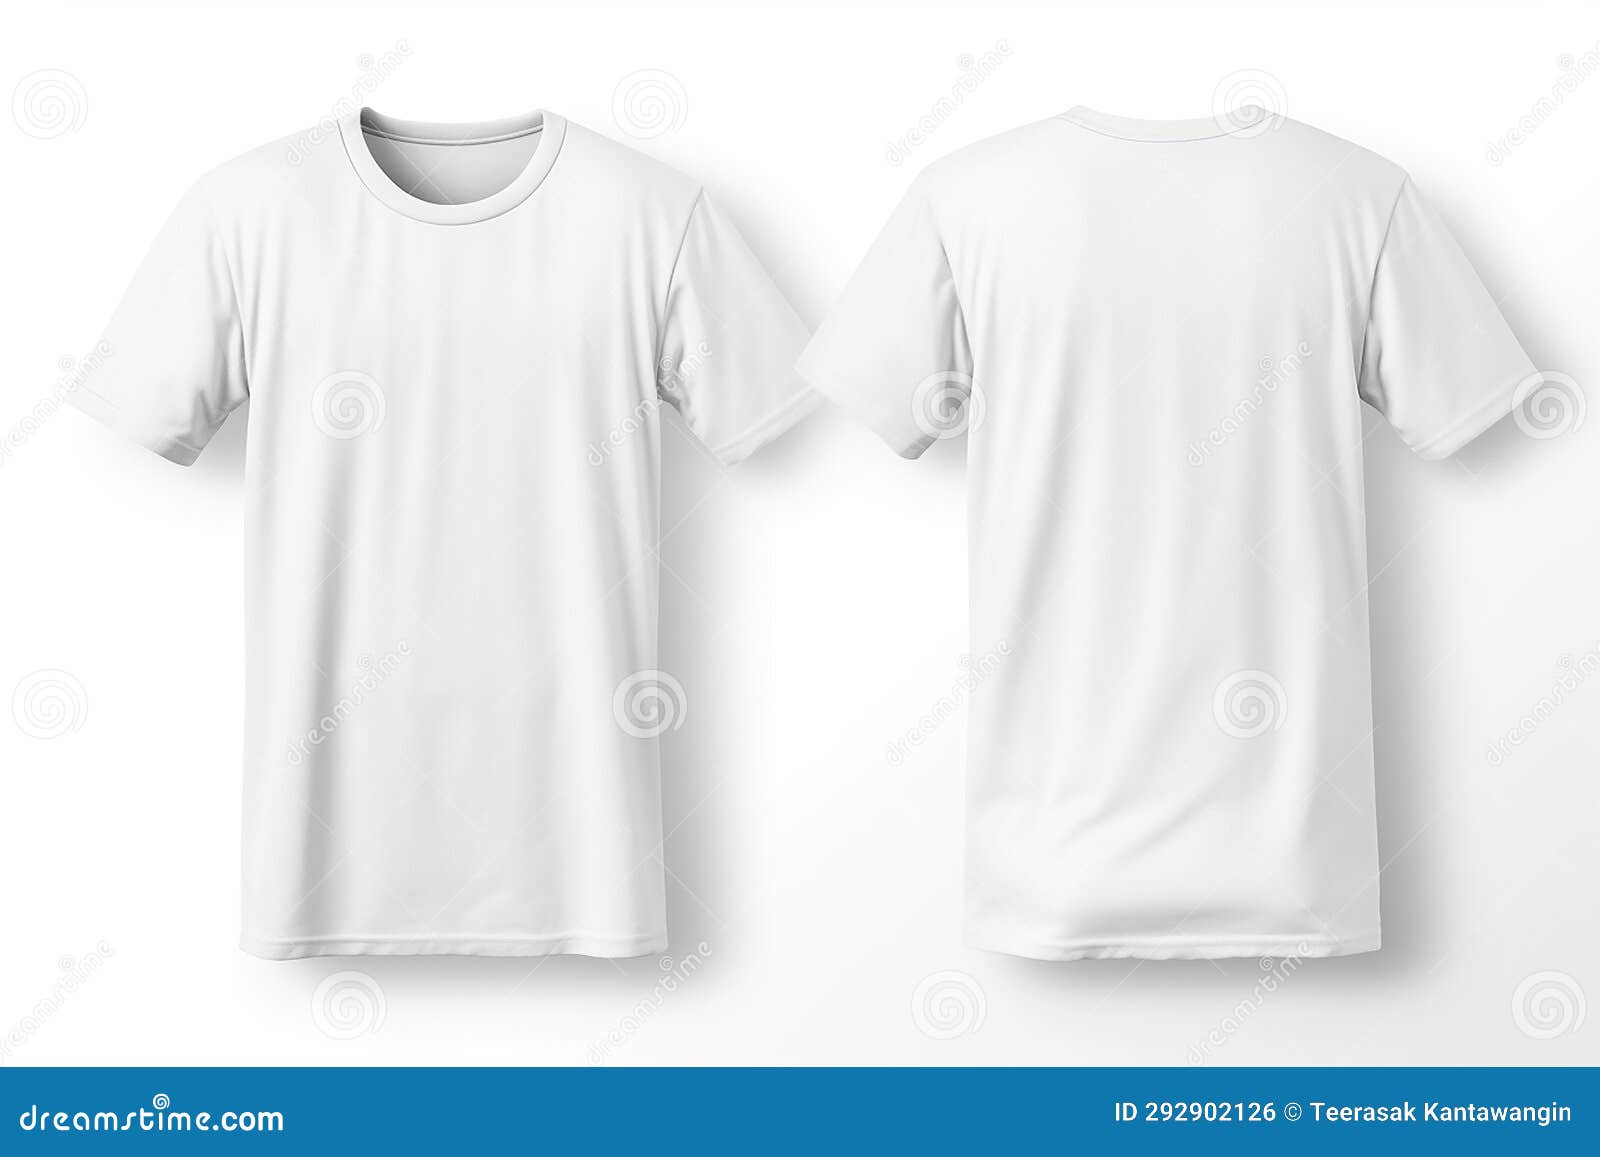 Plain White T-shirt Mockup Design. Front and Rear View. Isolated on ...